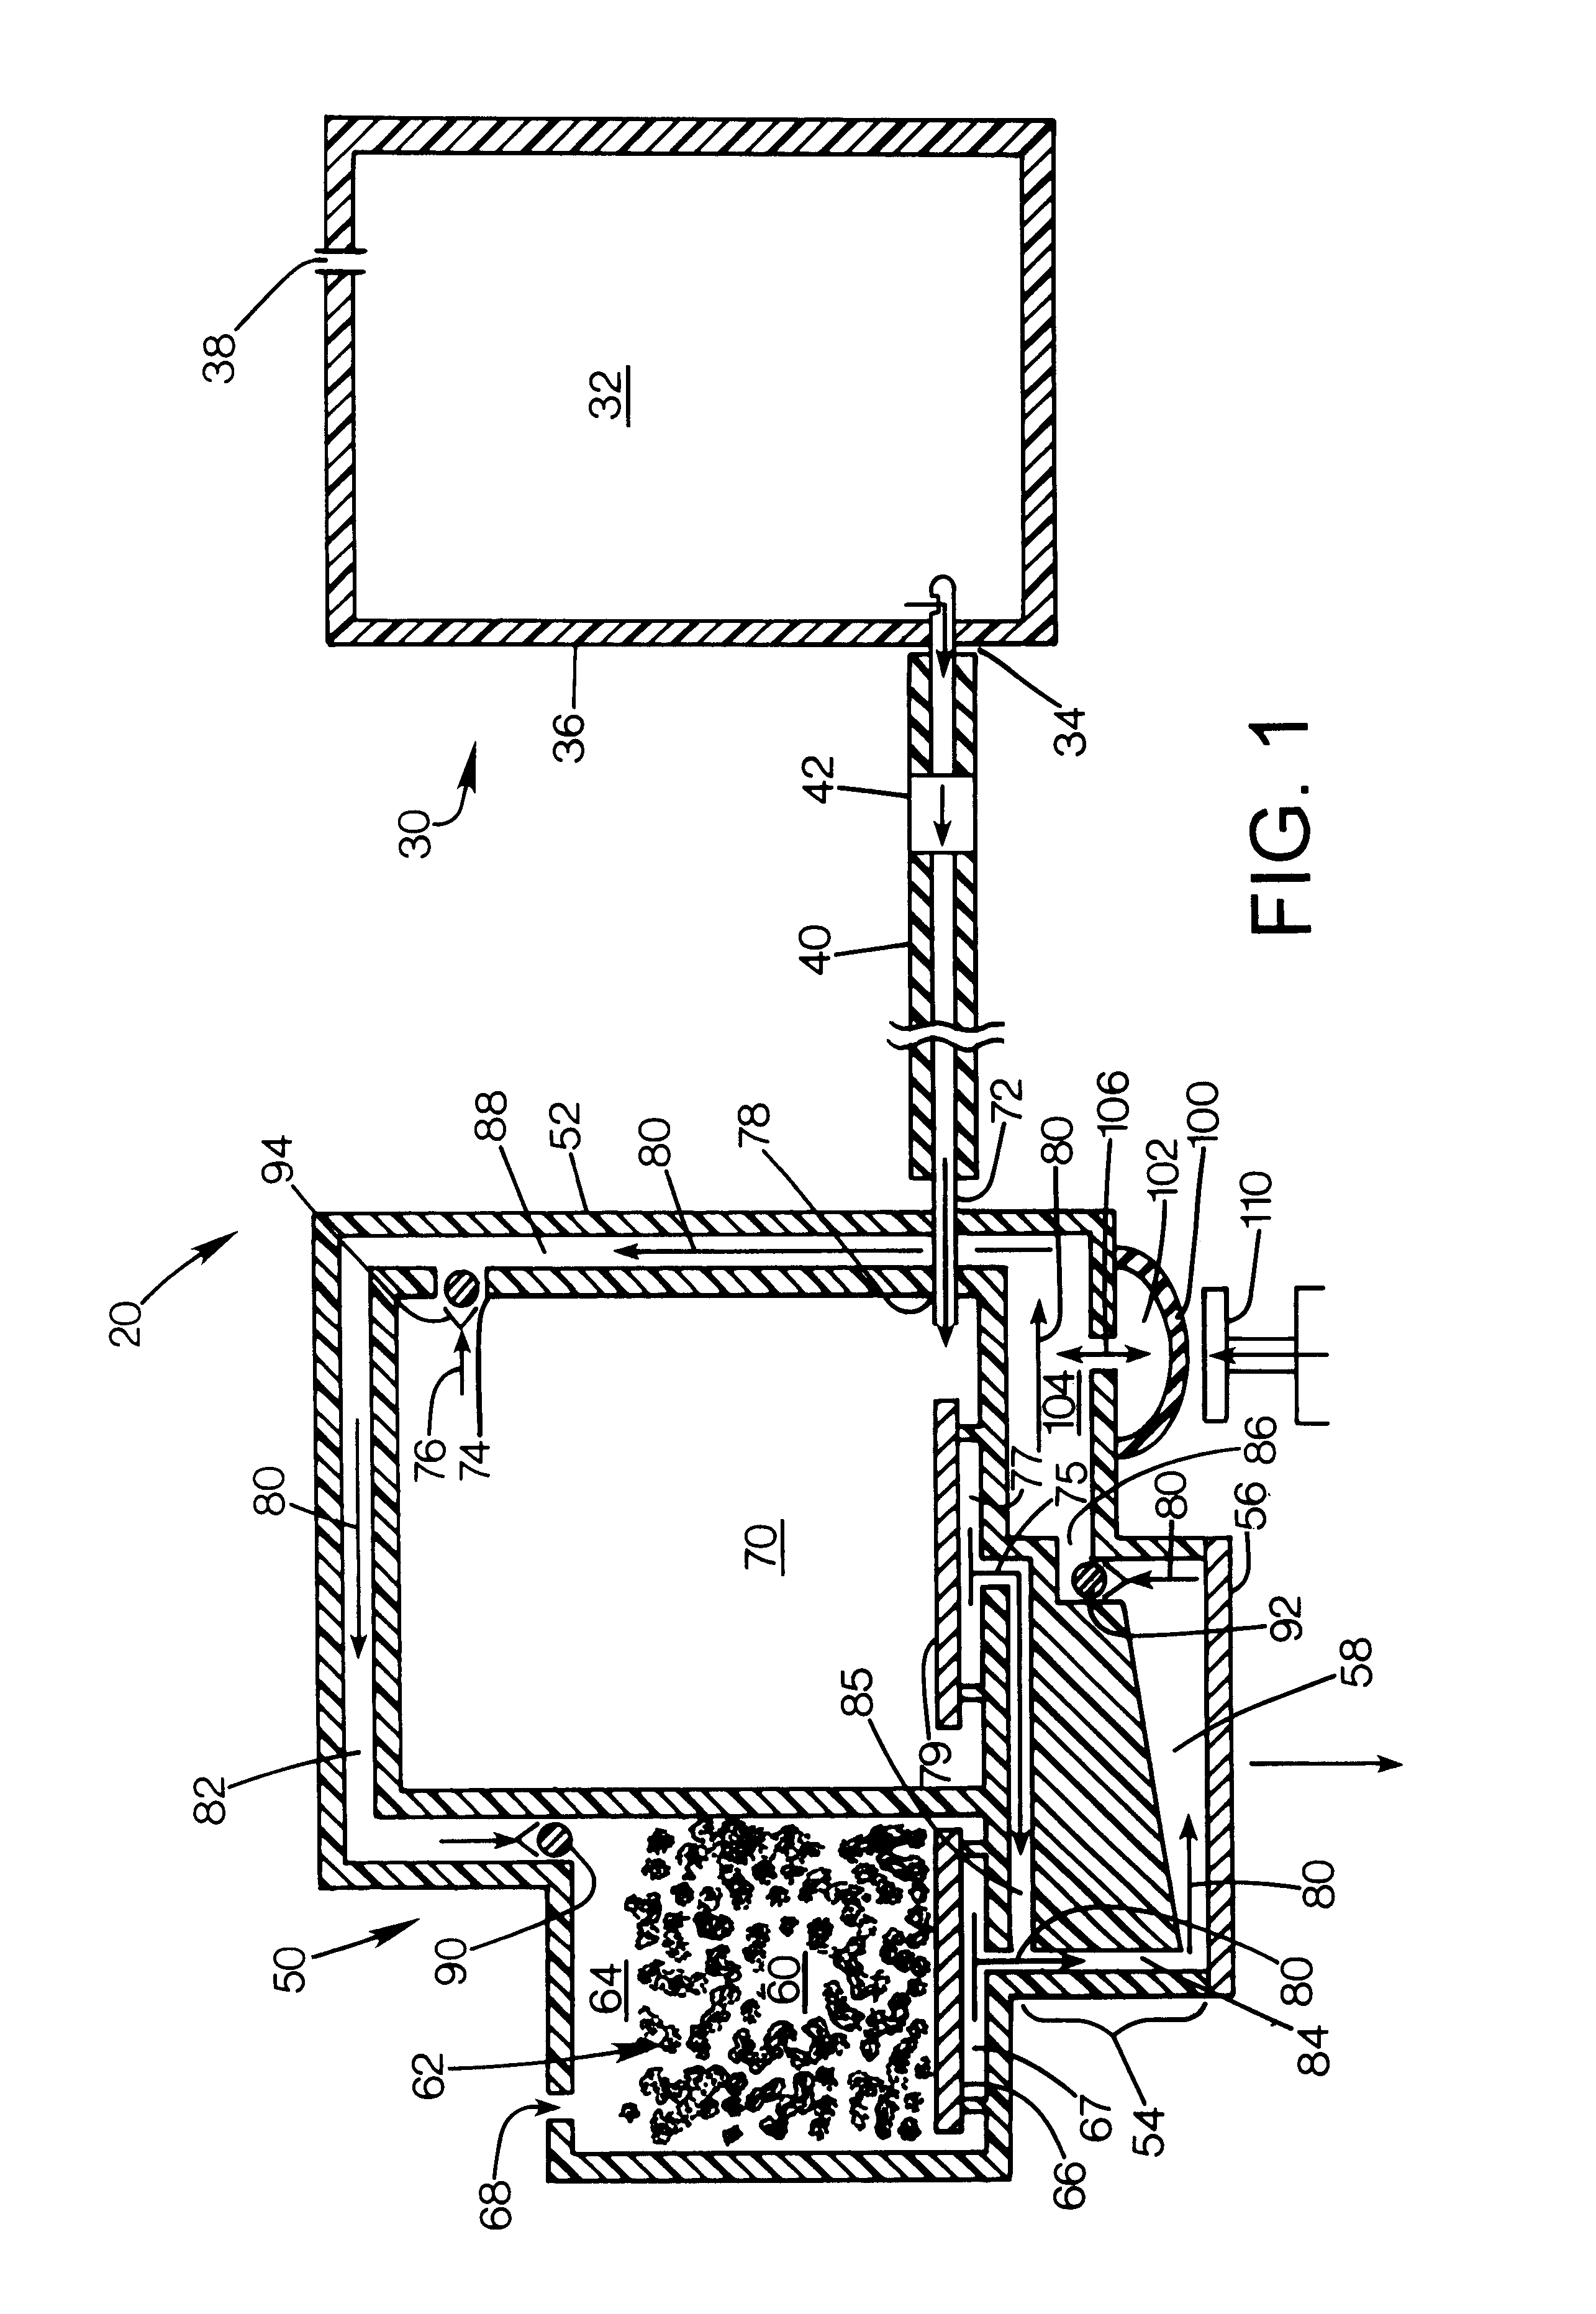 Re-circulating fluid delivery system